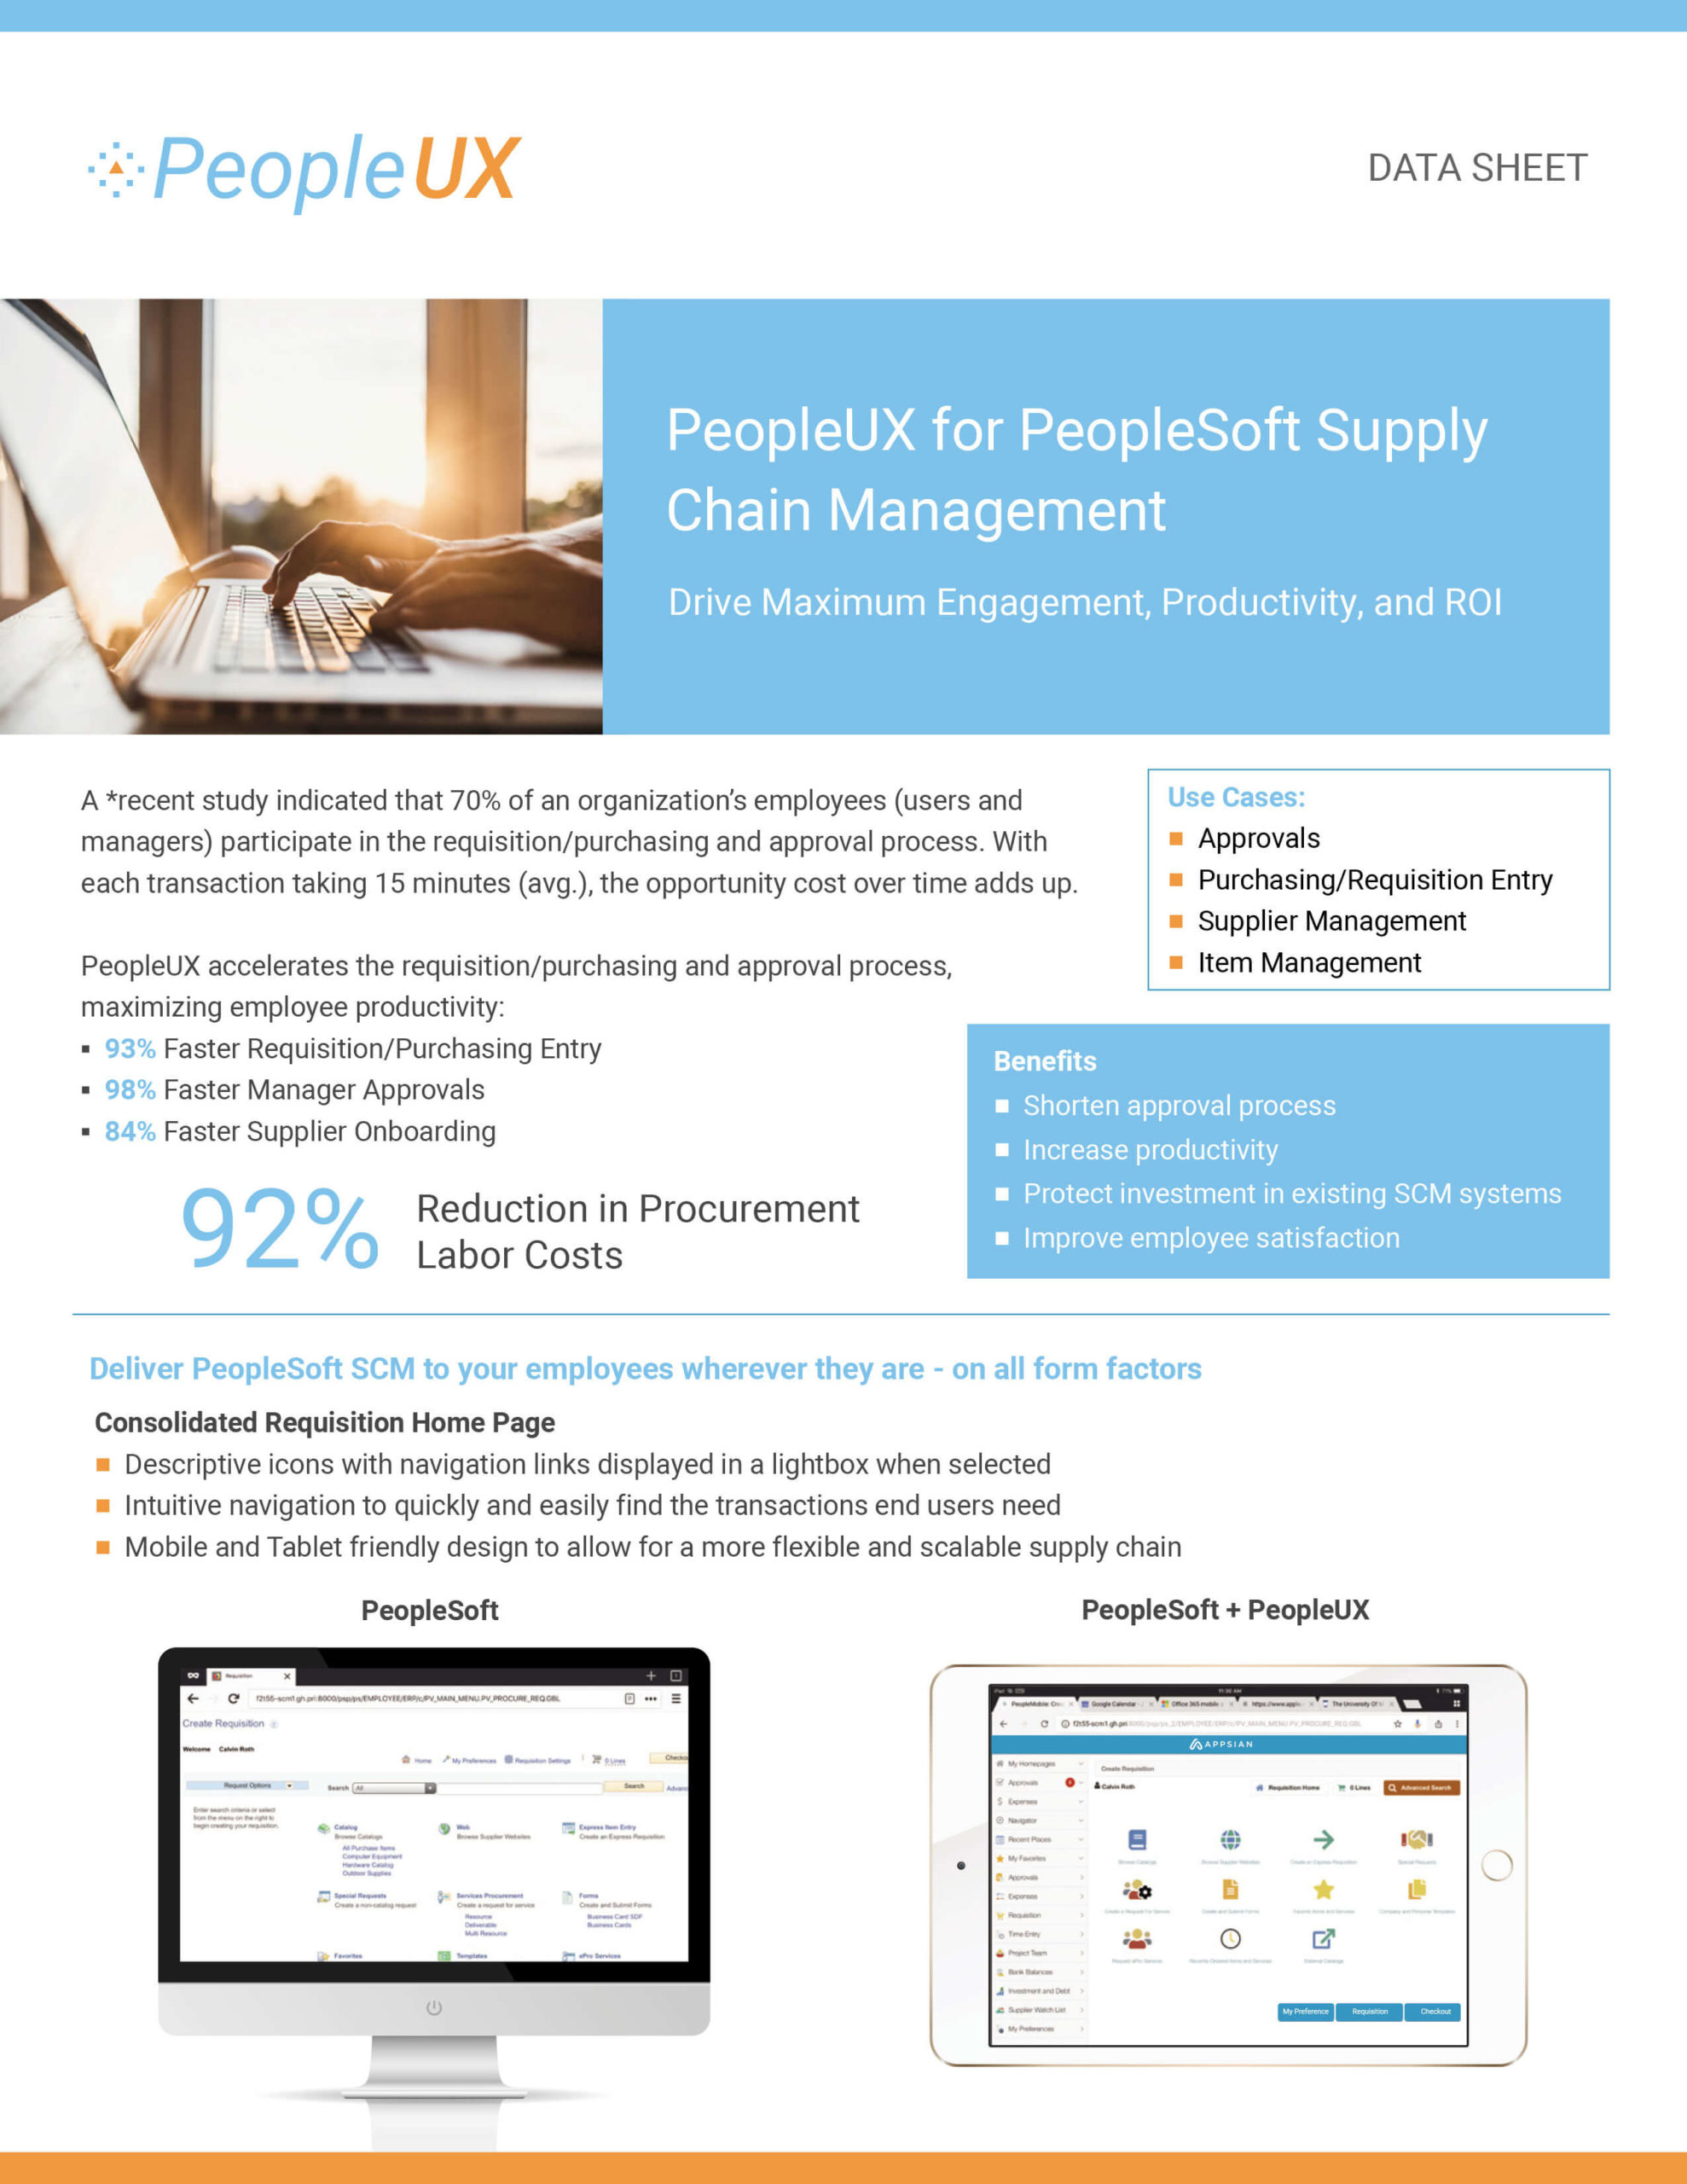 PeopleUX for PeopleSoft Supply Chain Management